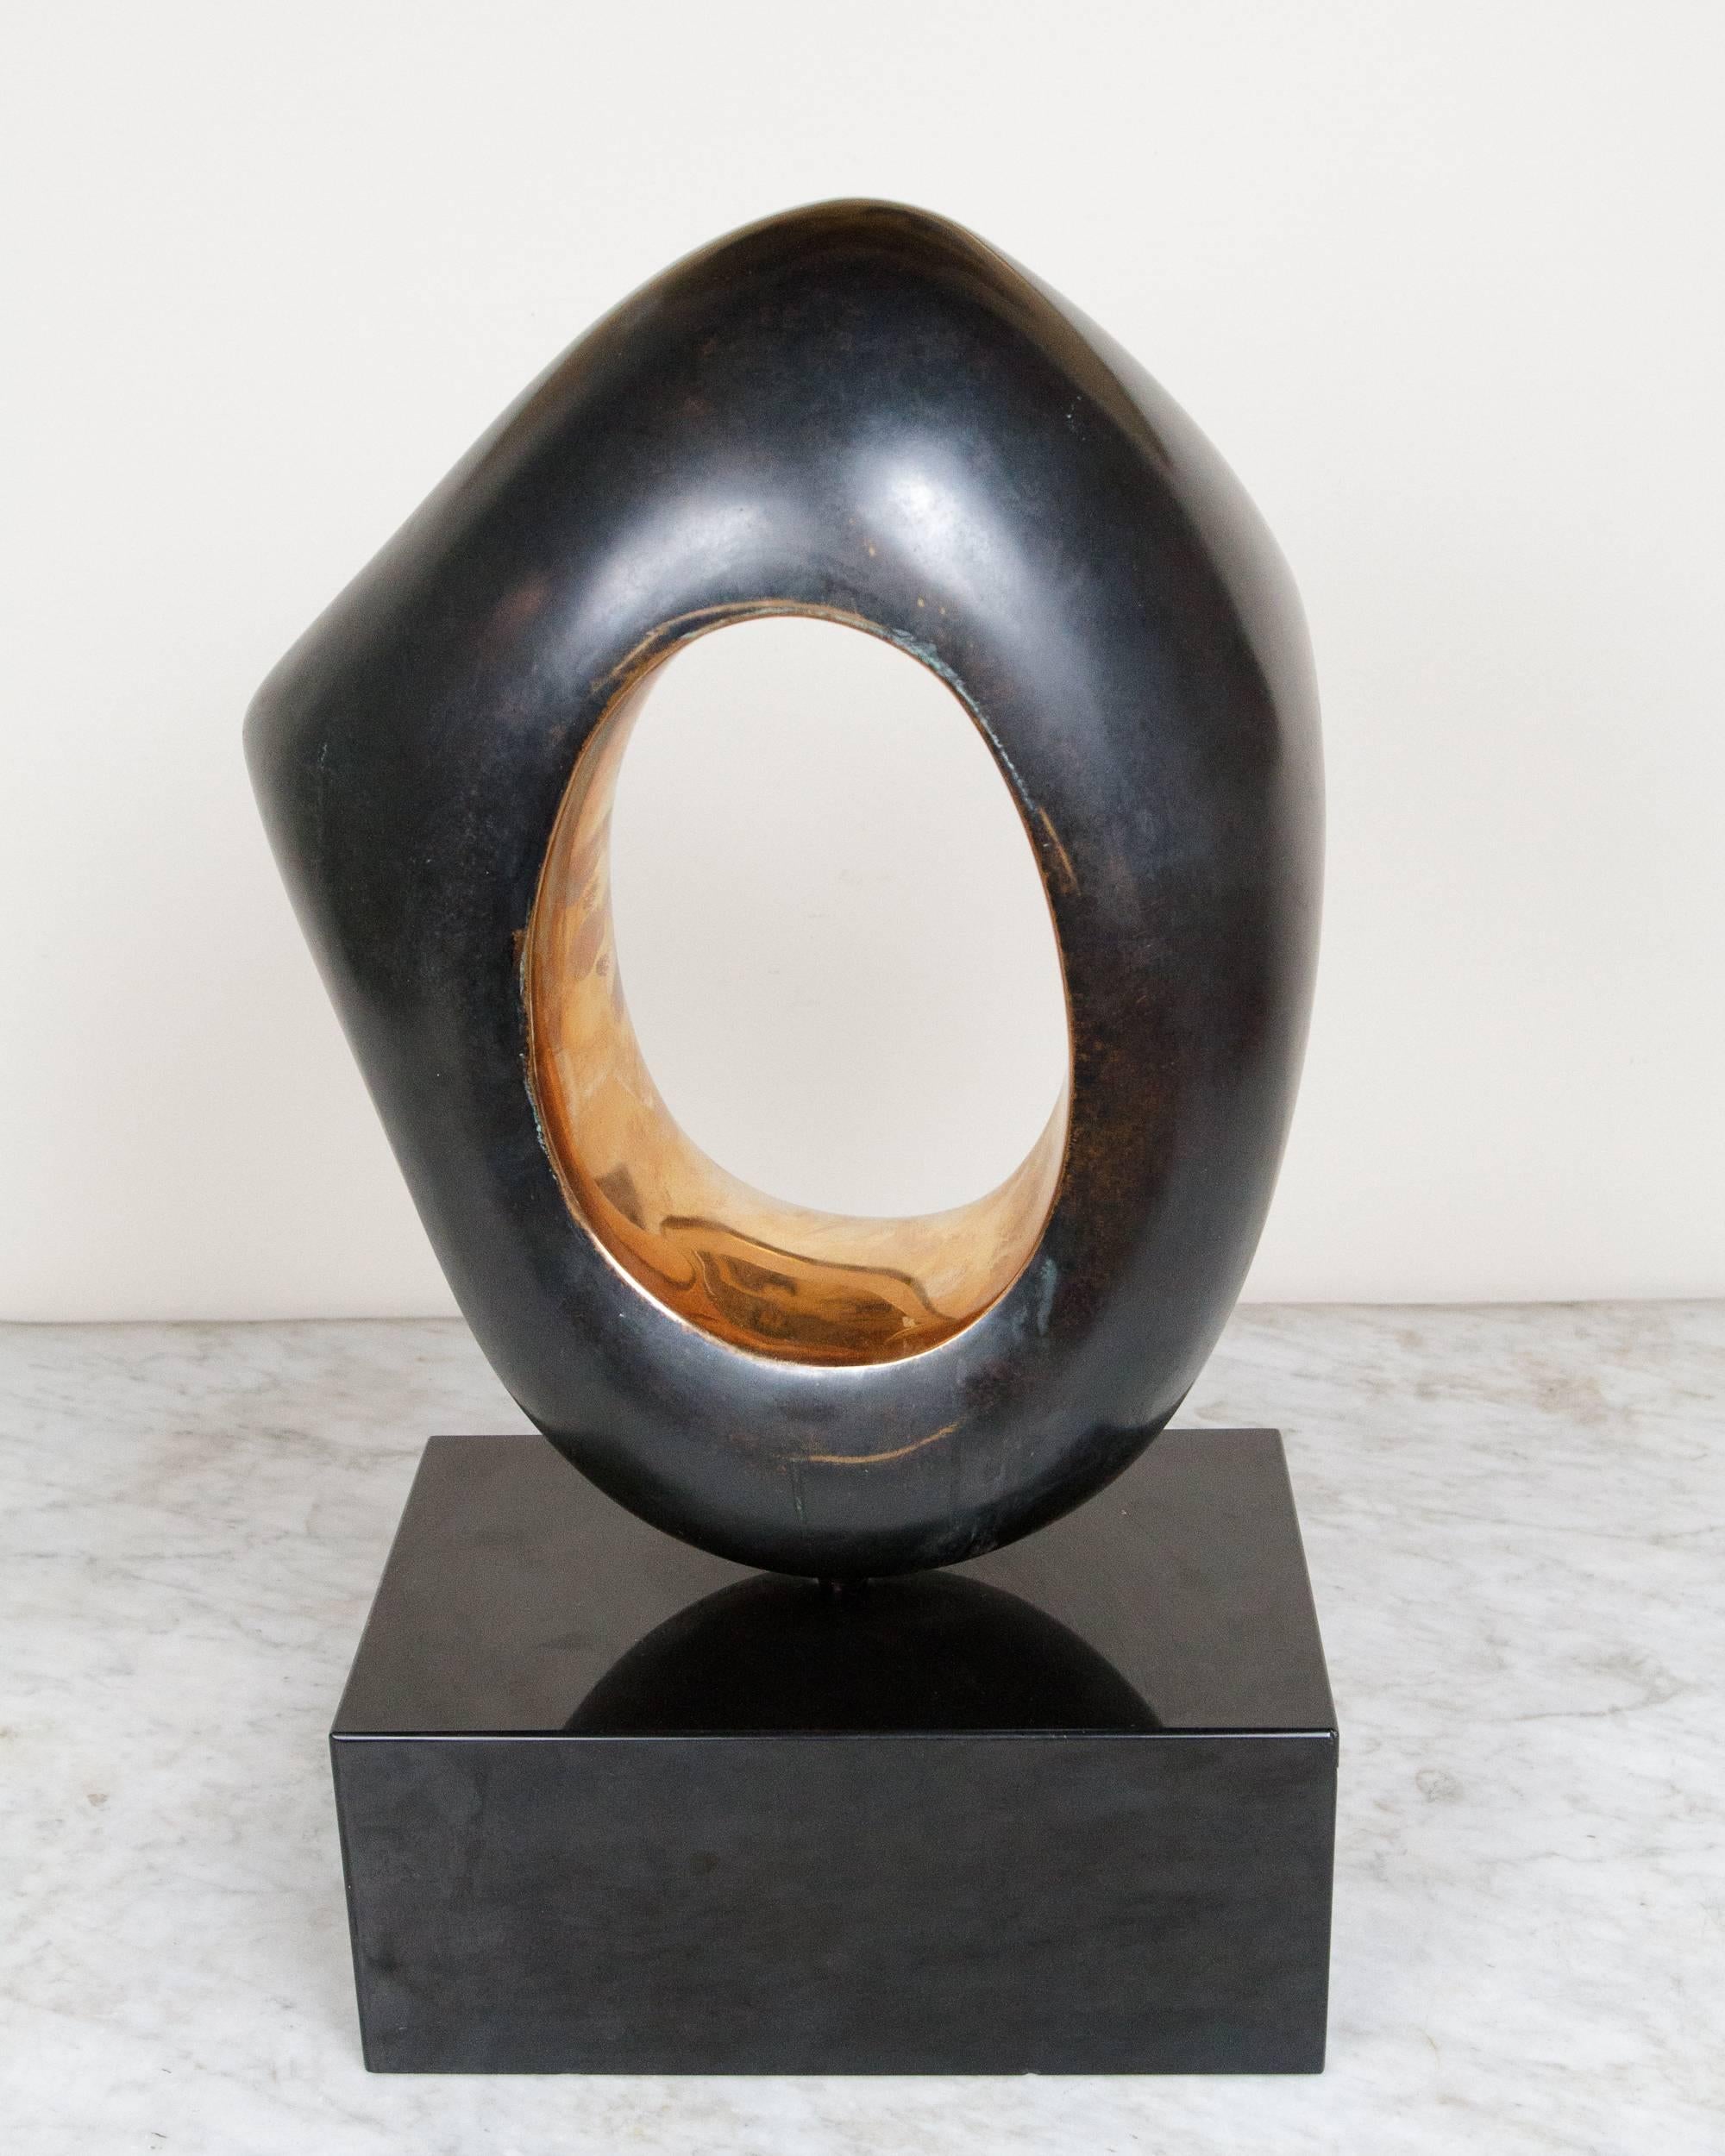 Stunning abstract bronze sculpture by Carla Lavatelli Signed: 'Carla Lavatelli'1/6
Lavatelli was commercially successful at her portraiture, winning several important commissions for notable sitters, among them Grace Kelly, Princess of Monaco, and